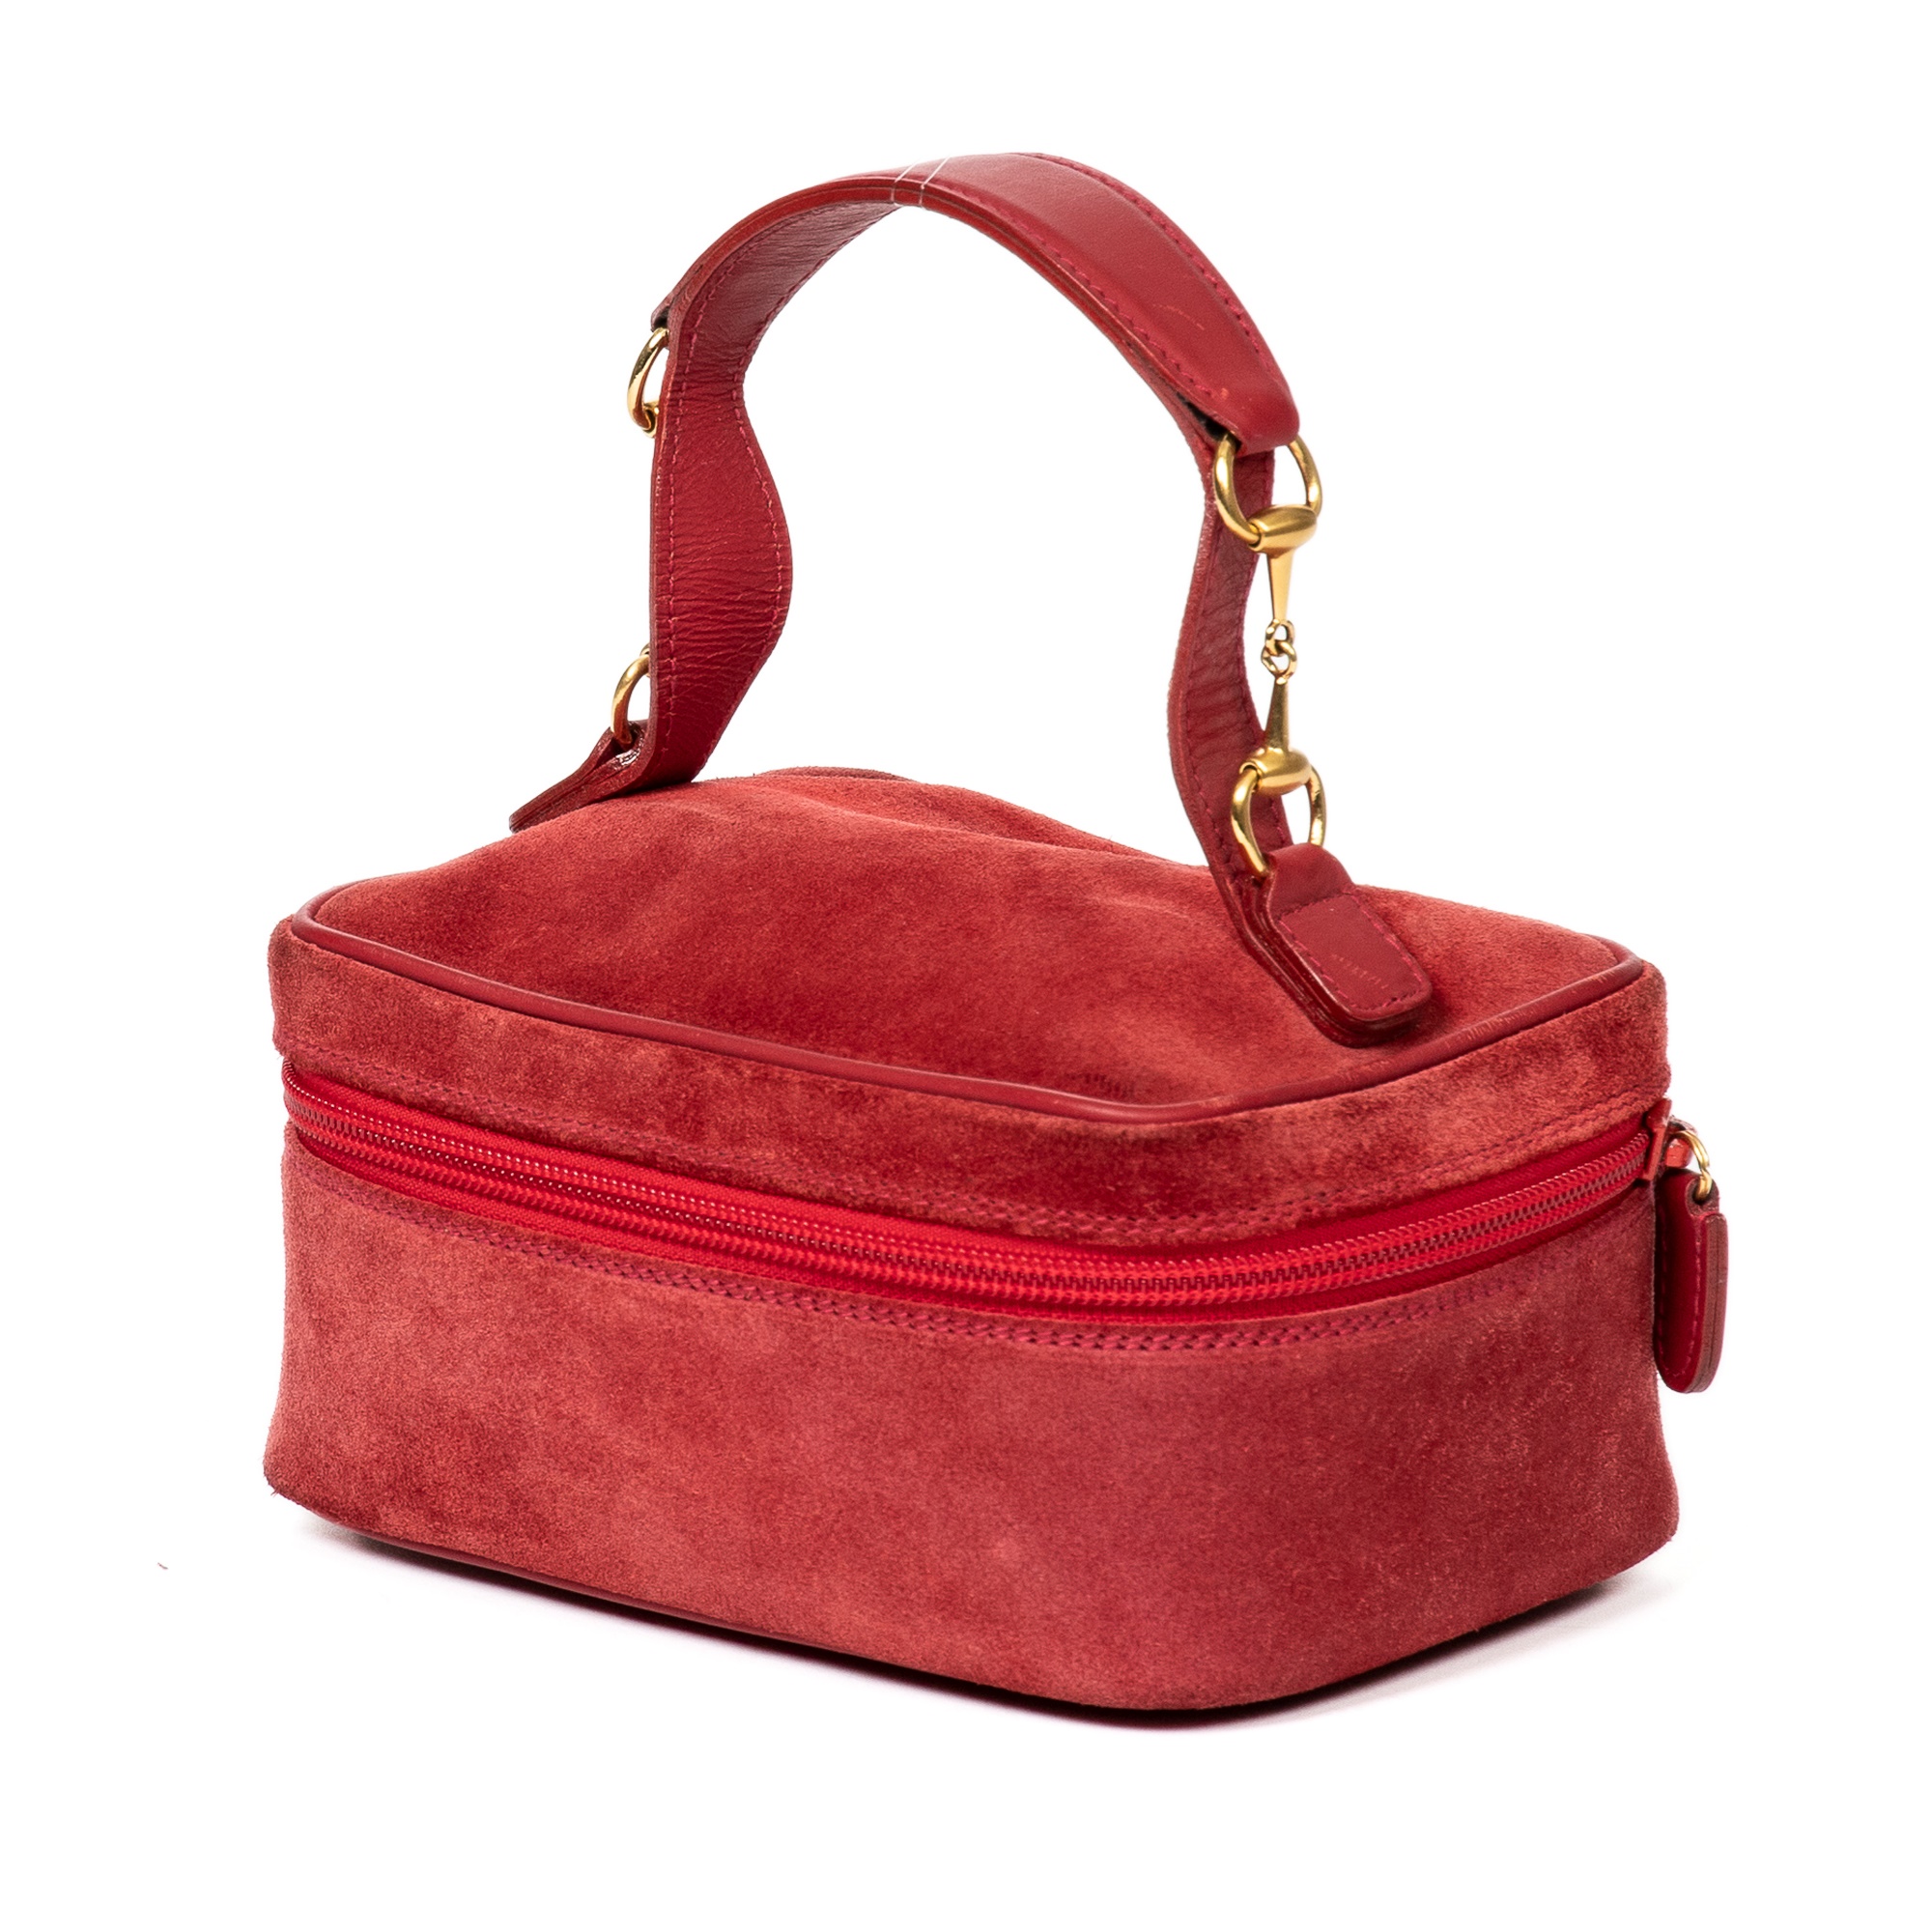 Gucci Red Suede Horsebit Cosmetic Case - Image 7 of 7